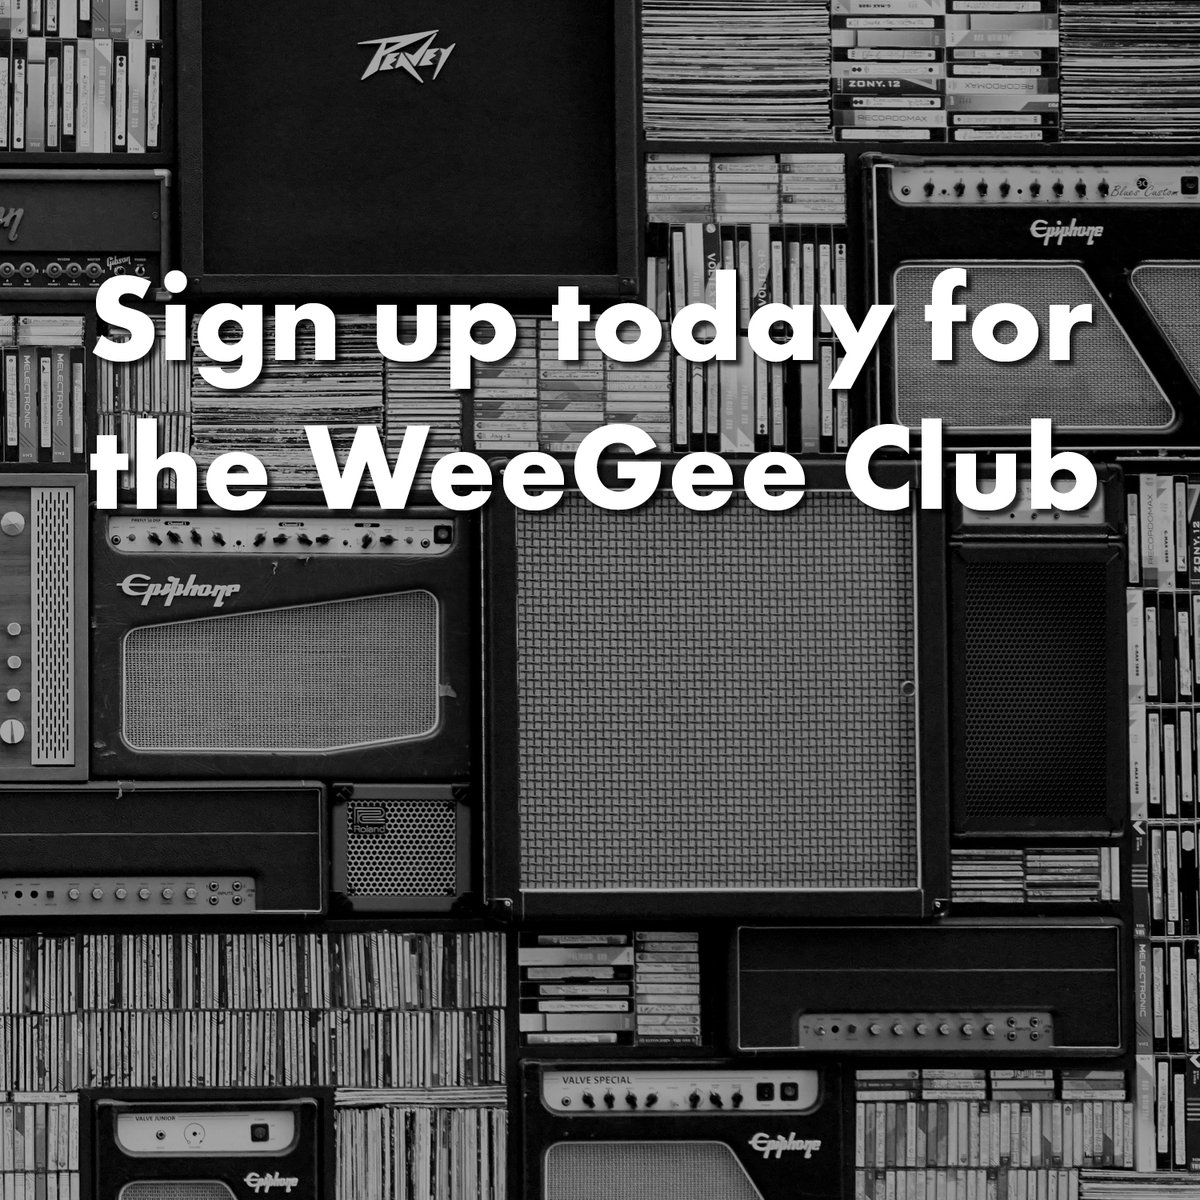 Want to be the first to get all the WDGY scoop?  Concert ticket giveaways to special promotions from our partners?
Simply sign up for the exclusive WeeGee Club newsletter on our website:  wdgyradio.com
All fans that join the WeeGee Club have a chance to win WDGY swag!